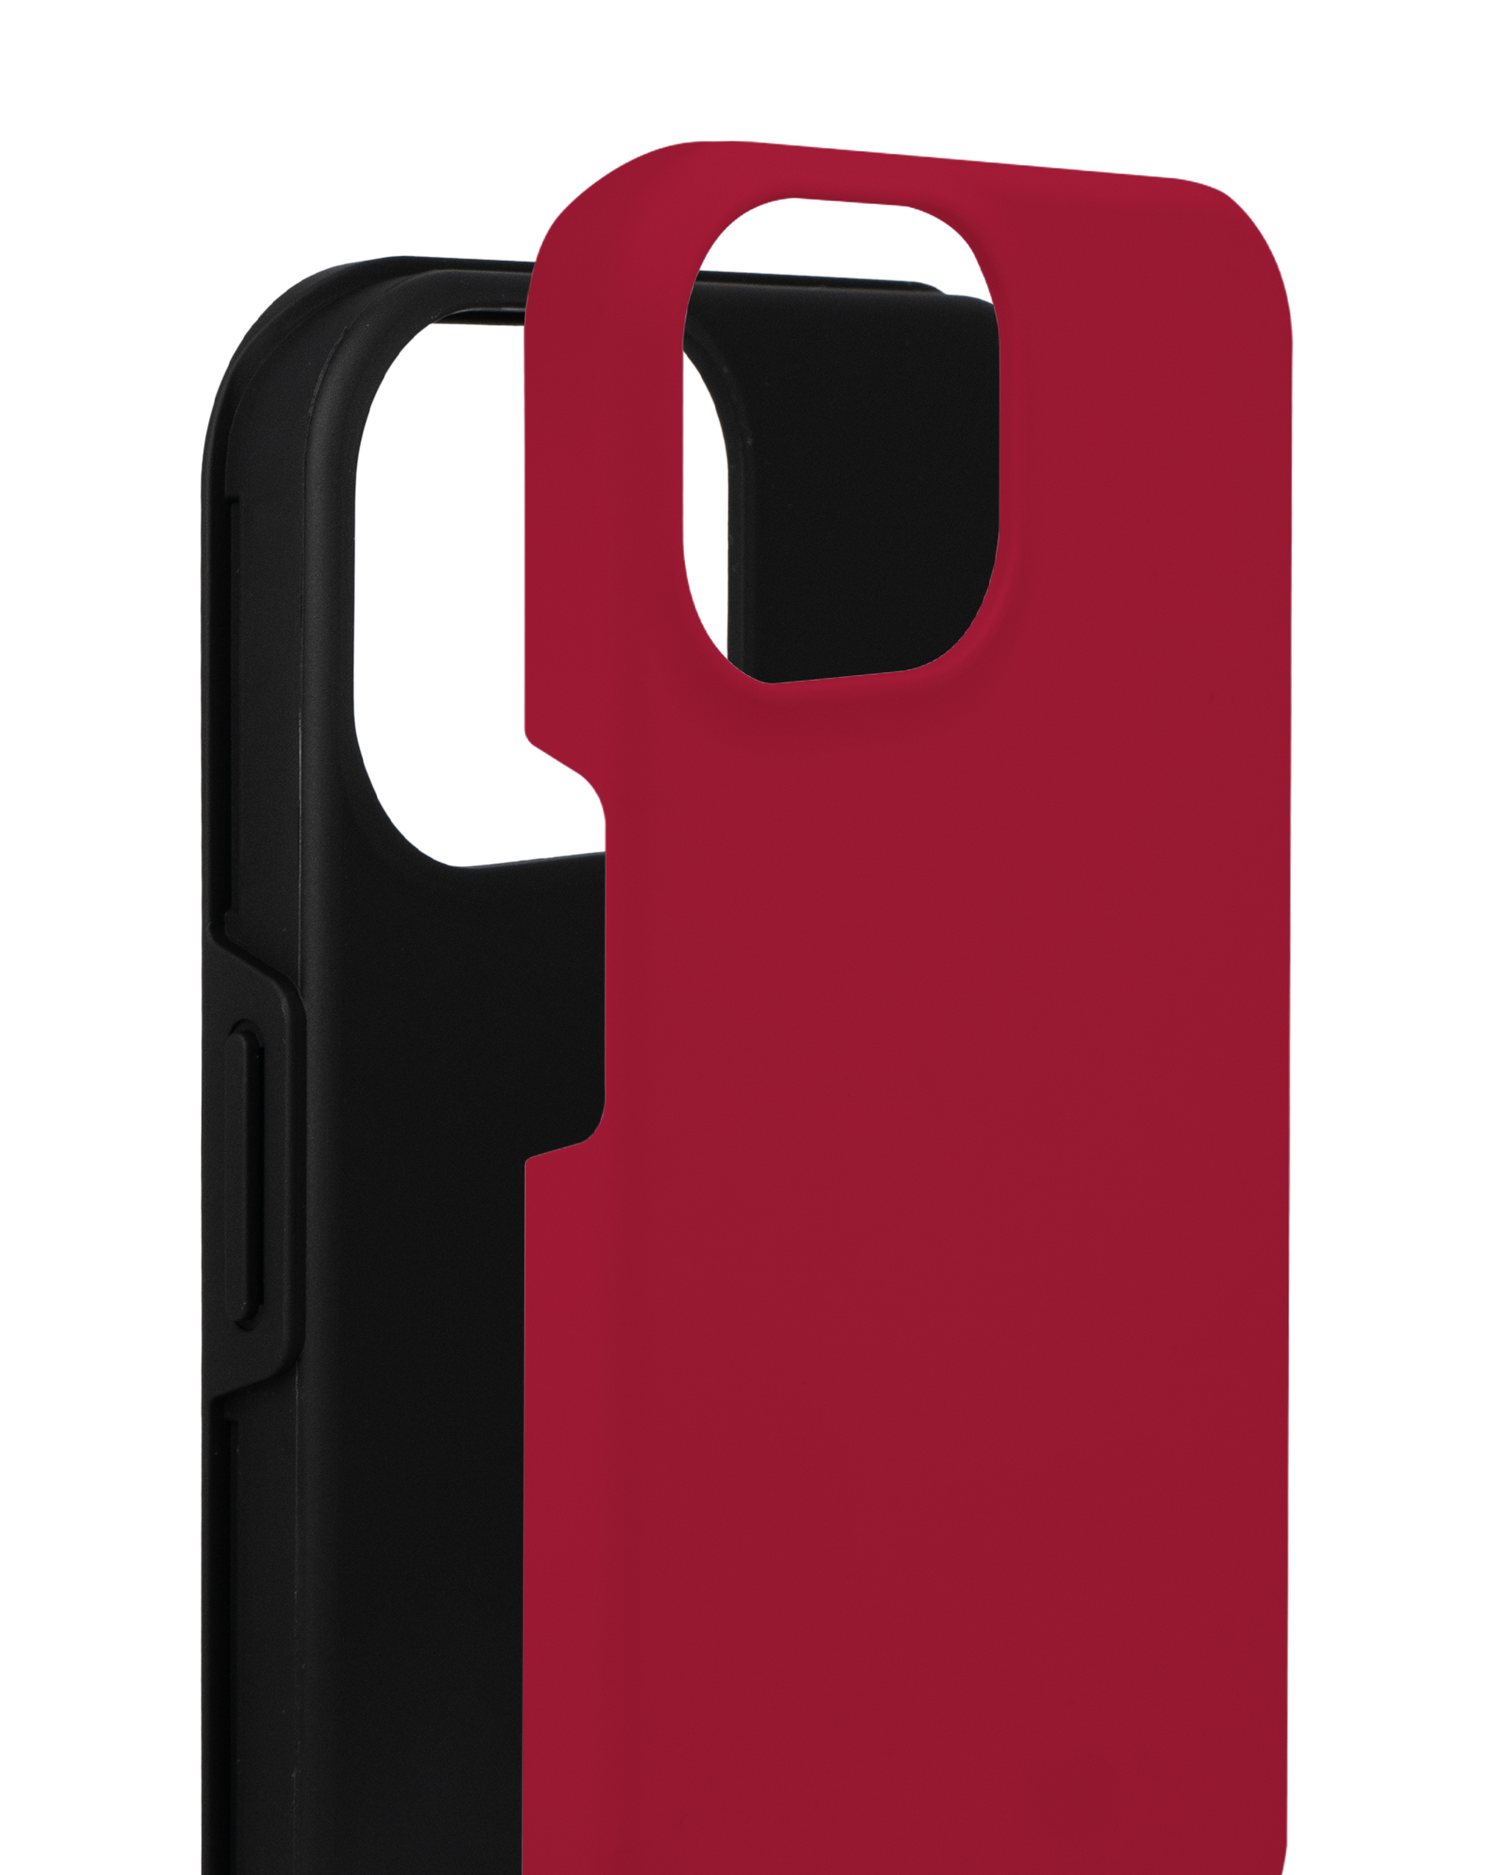 RED Premium Phone for Apple iPhone 14 consisting of 2 parts